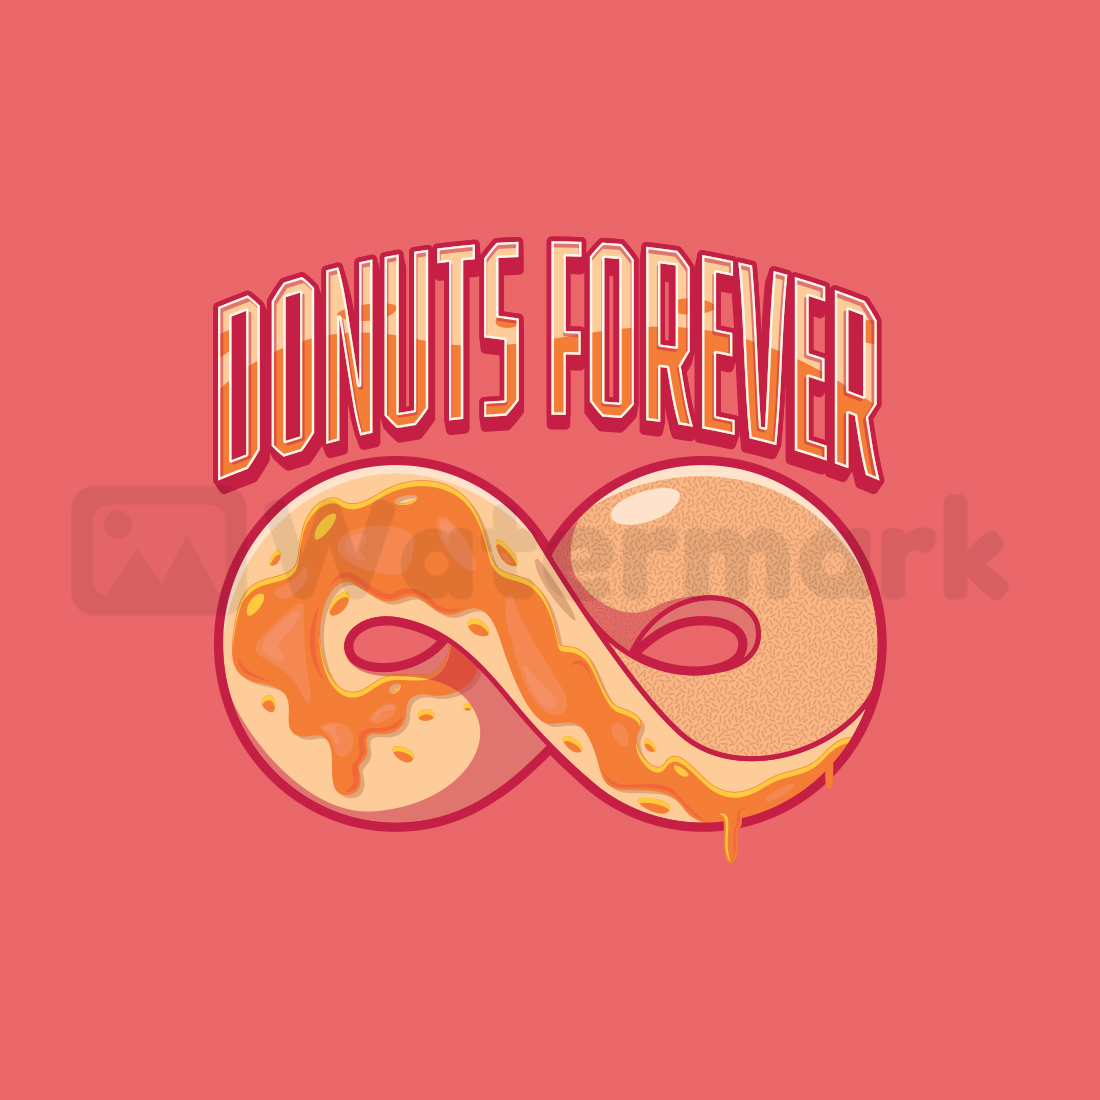 Donuts Forever! cover image.